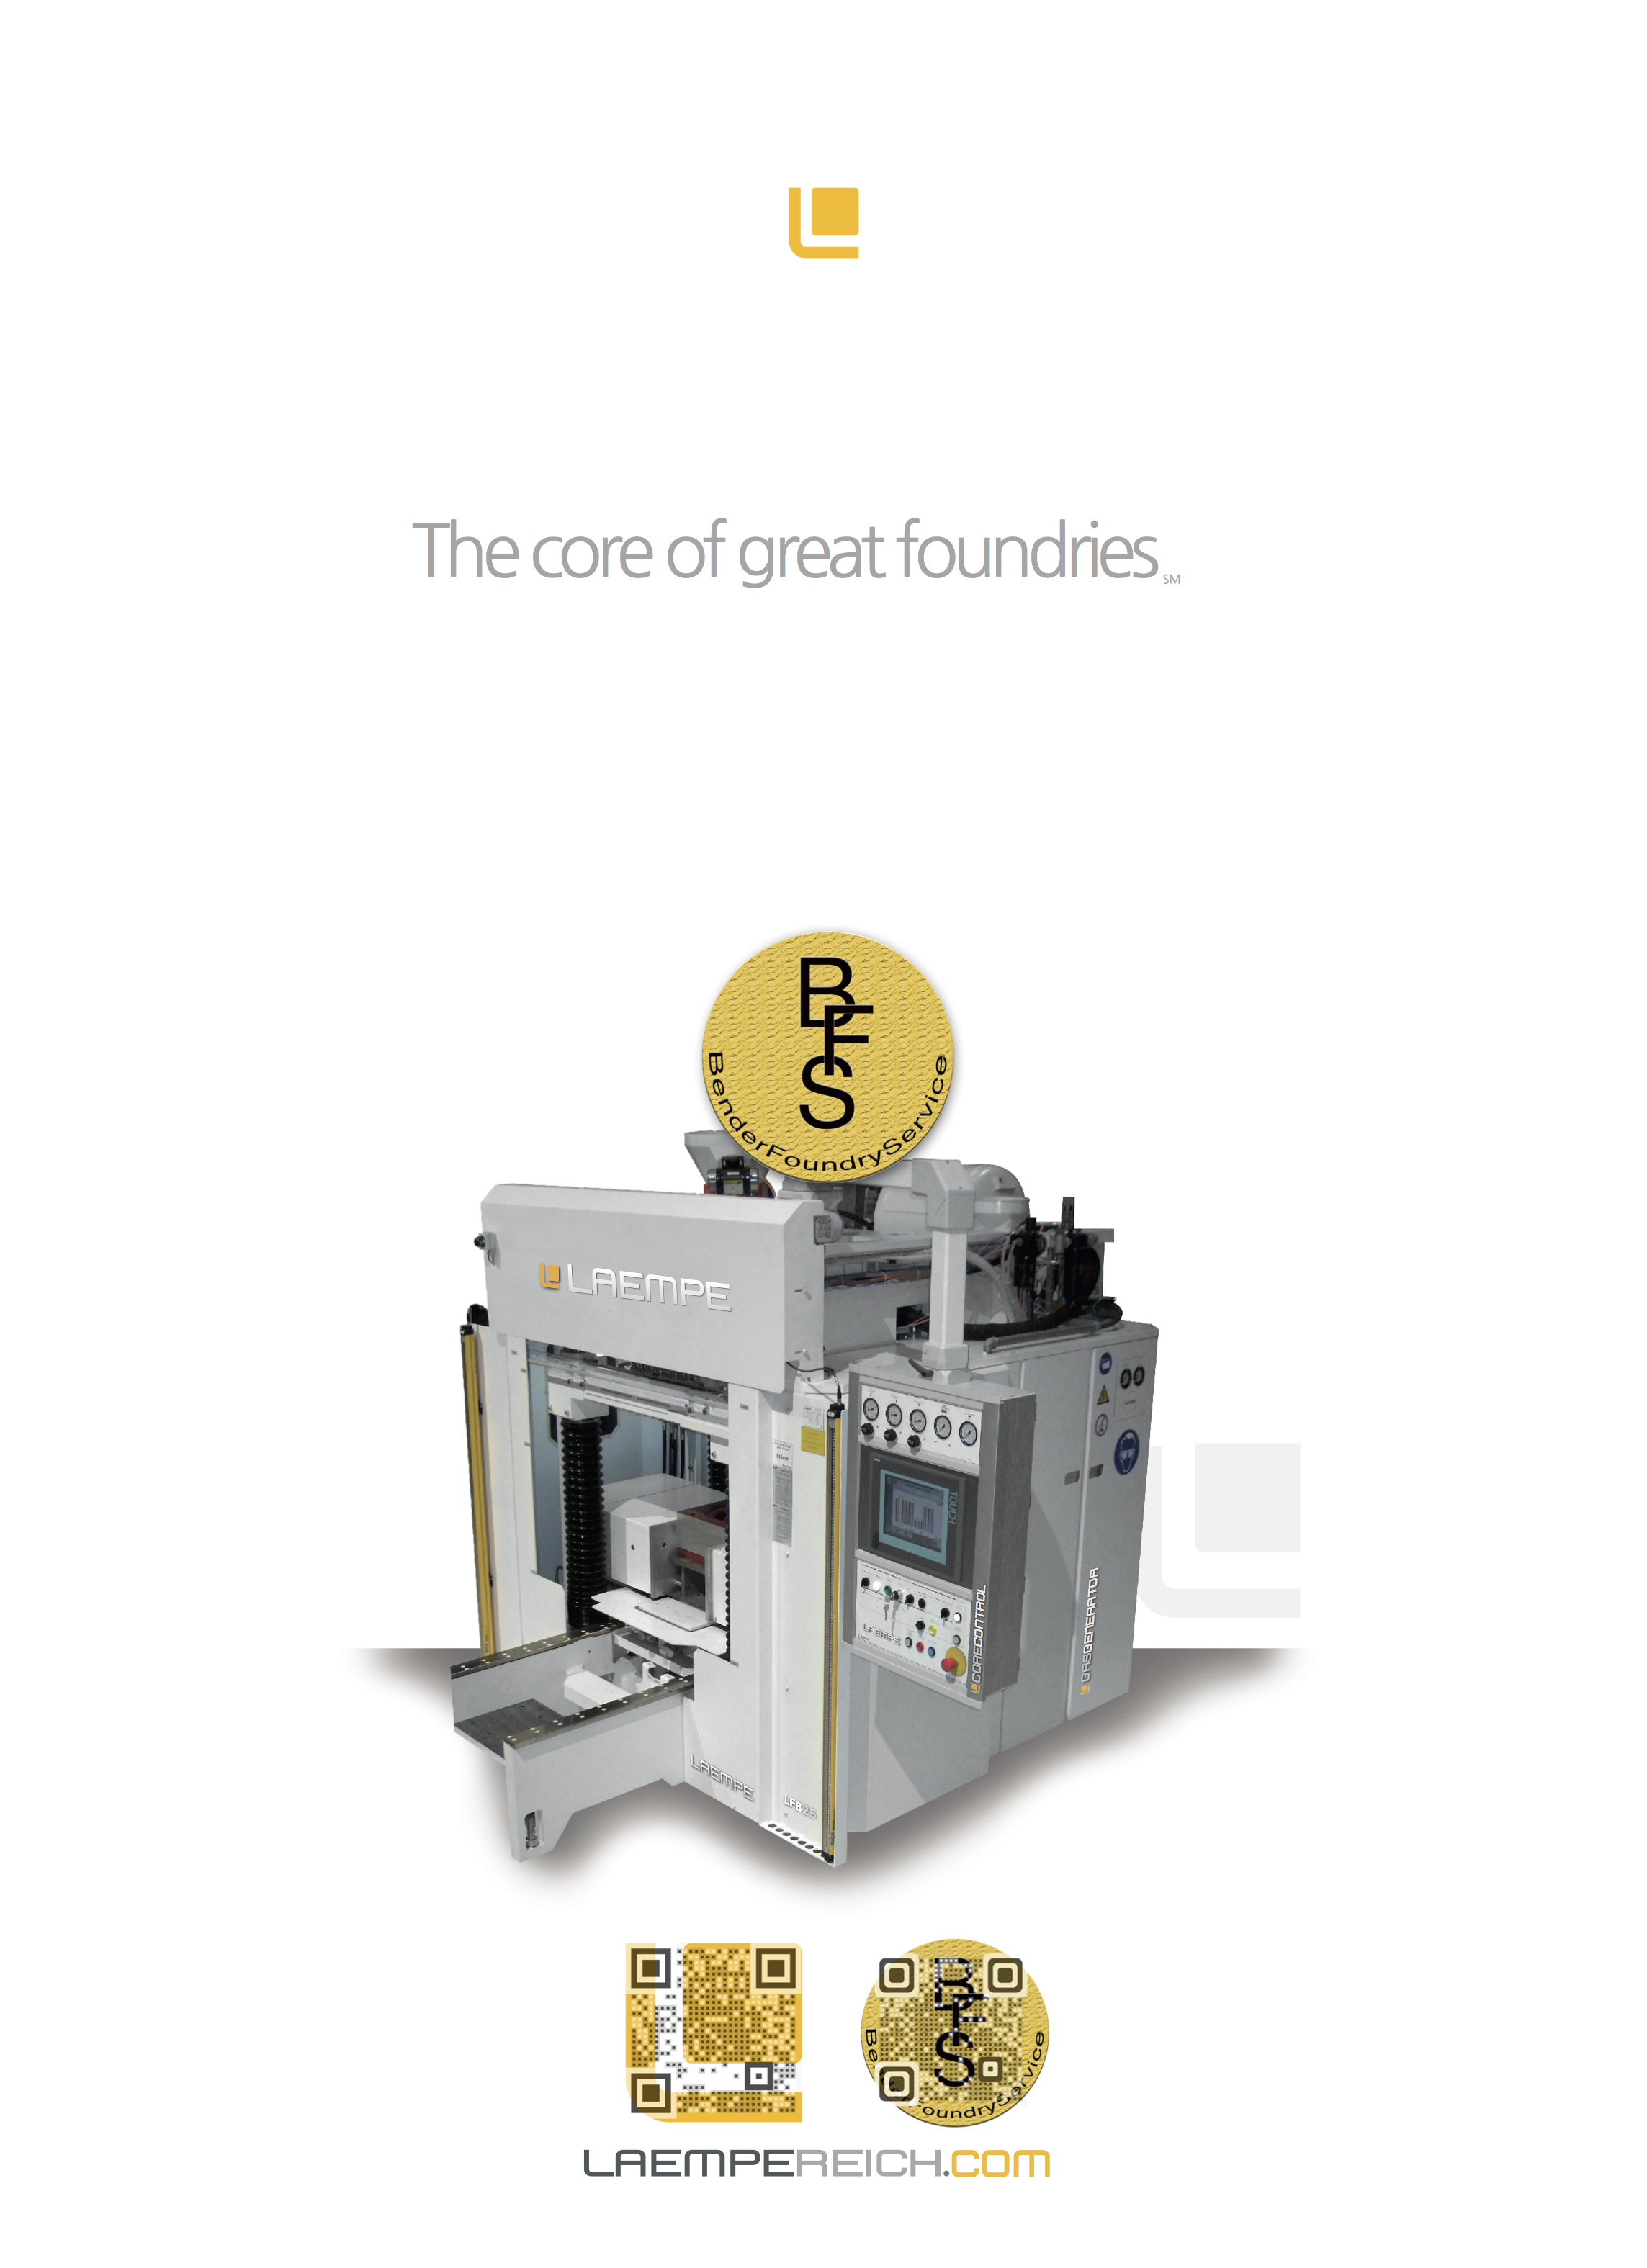 Bender - LB25 2015 -  The Core of Great Foundries.jpg